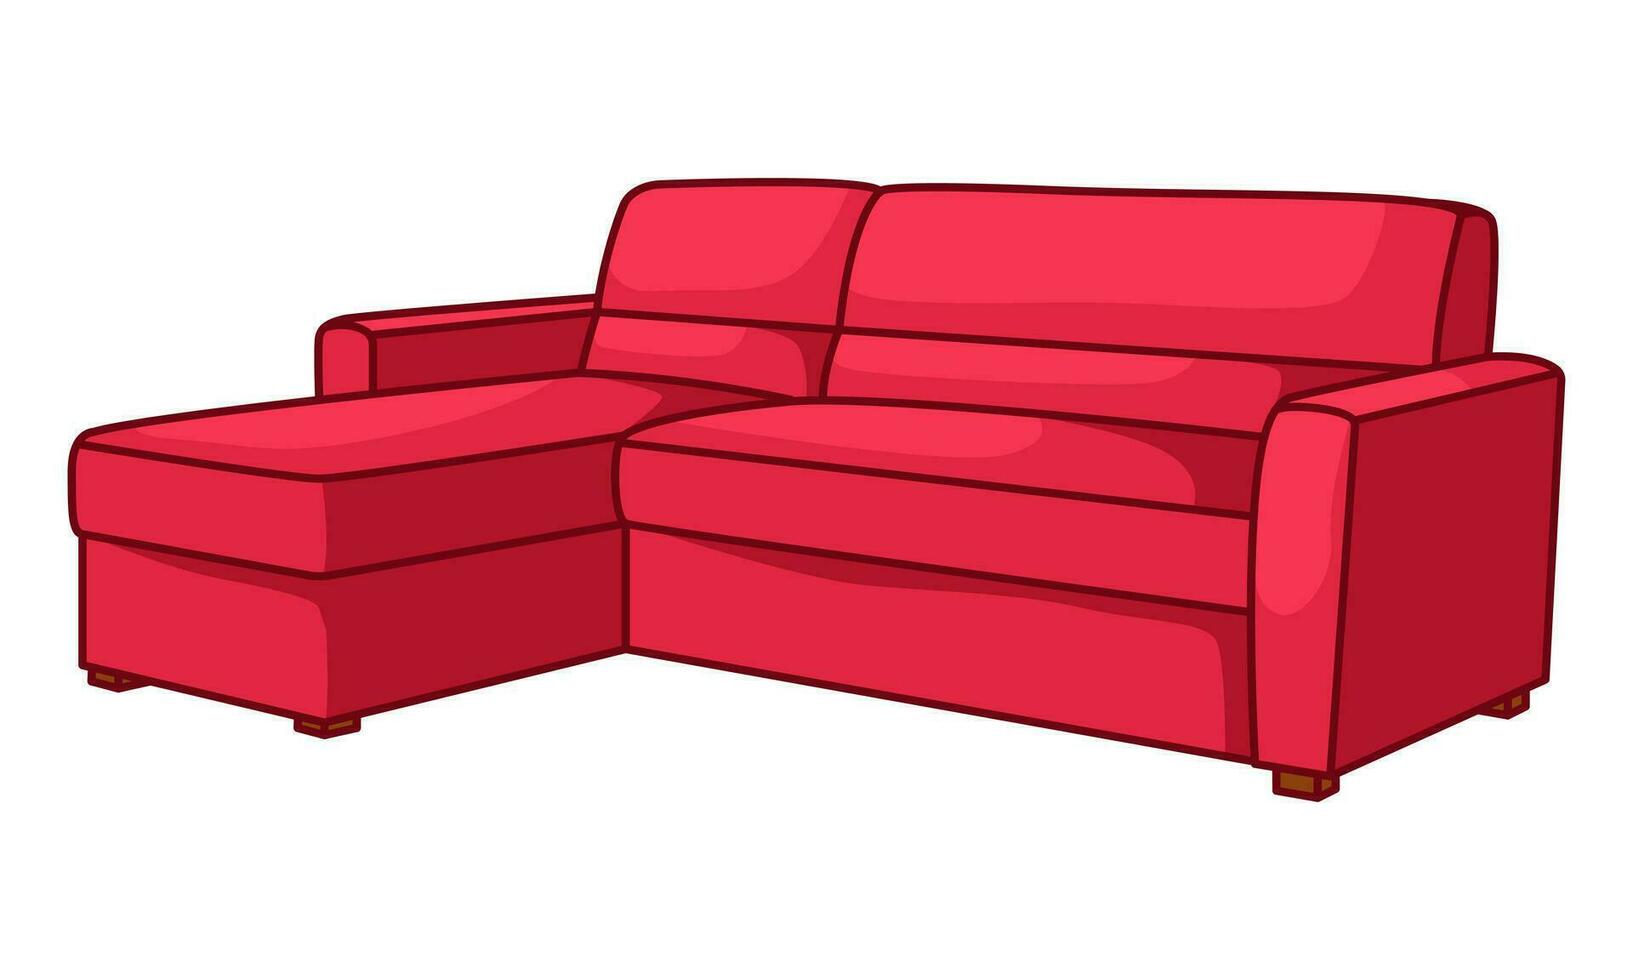 Cartoon vector illustration of a sofa. Comfortable furniture for interior design, highlighted on a white background. Modern sofa model icon.